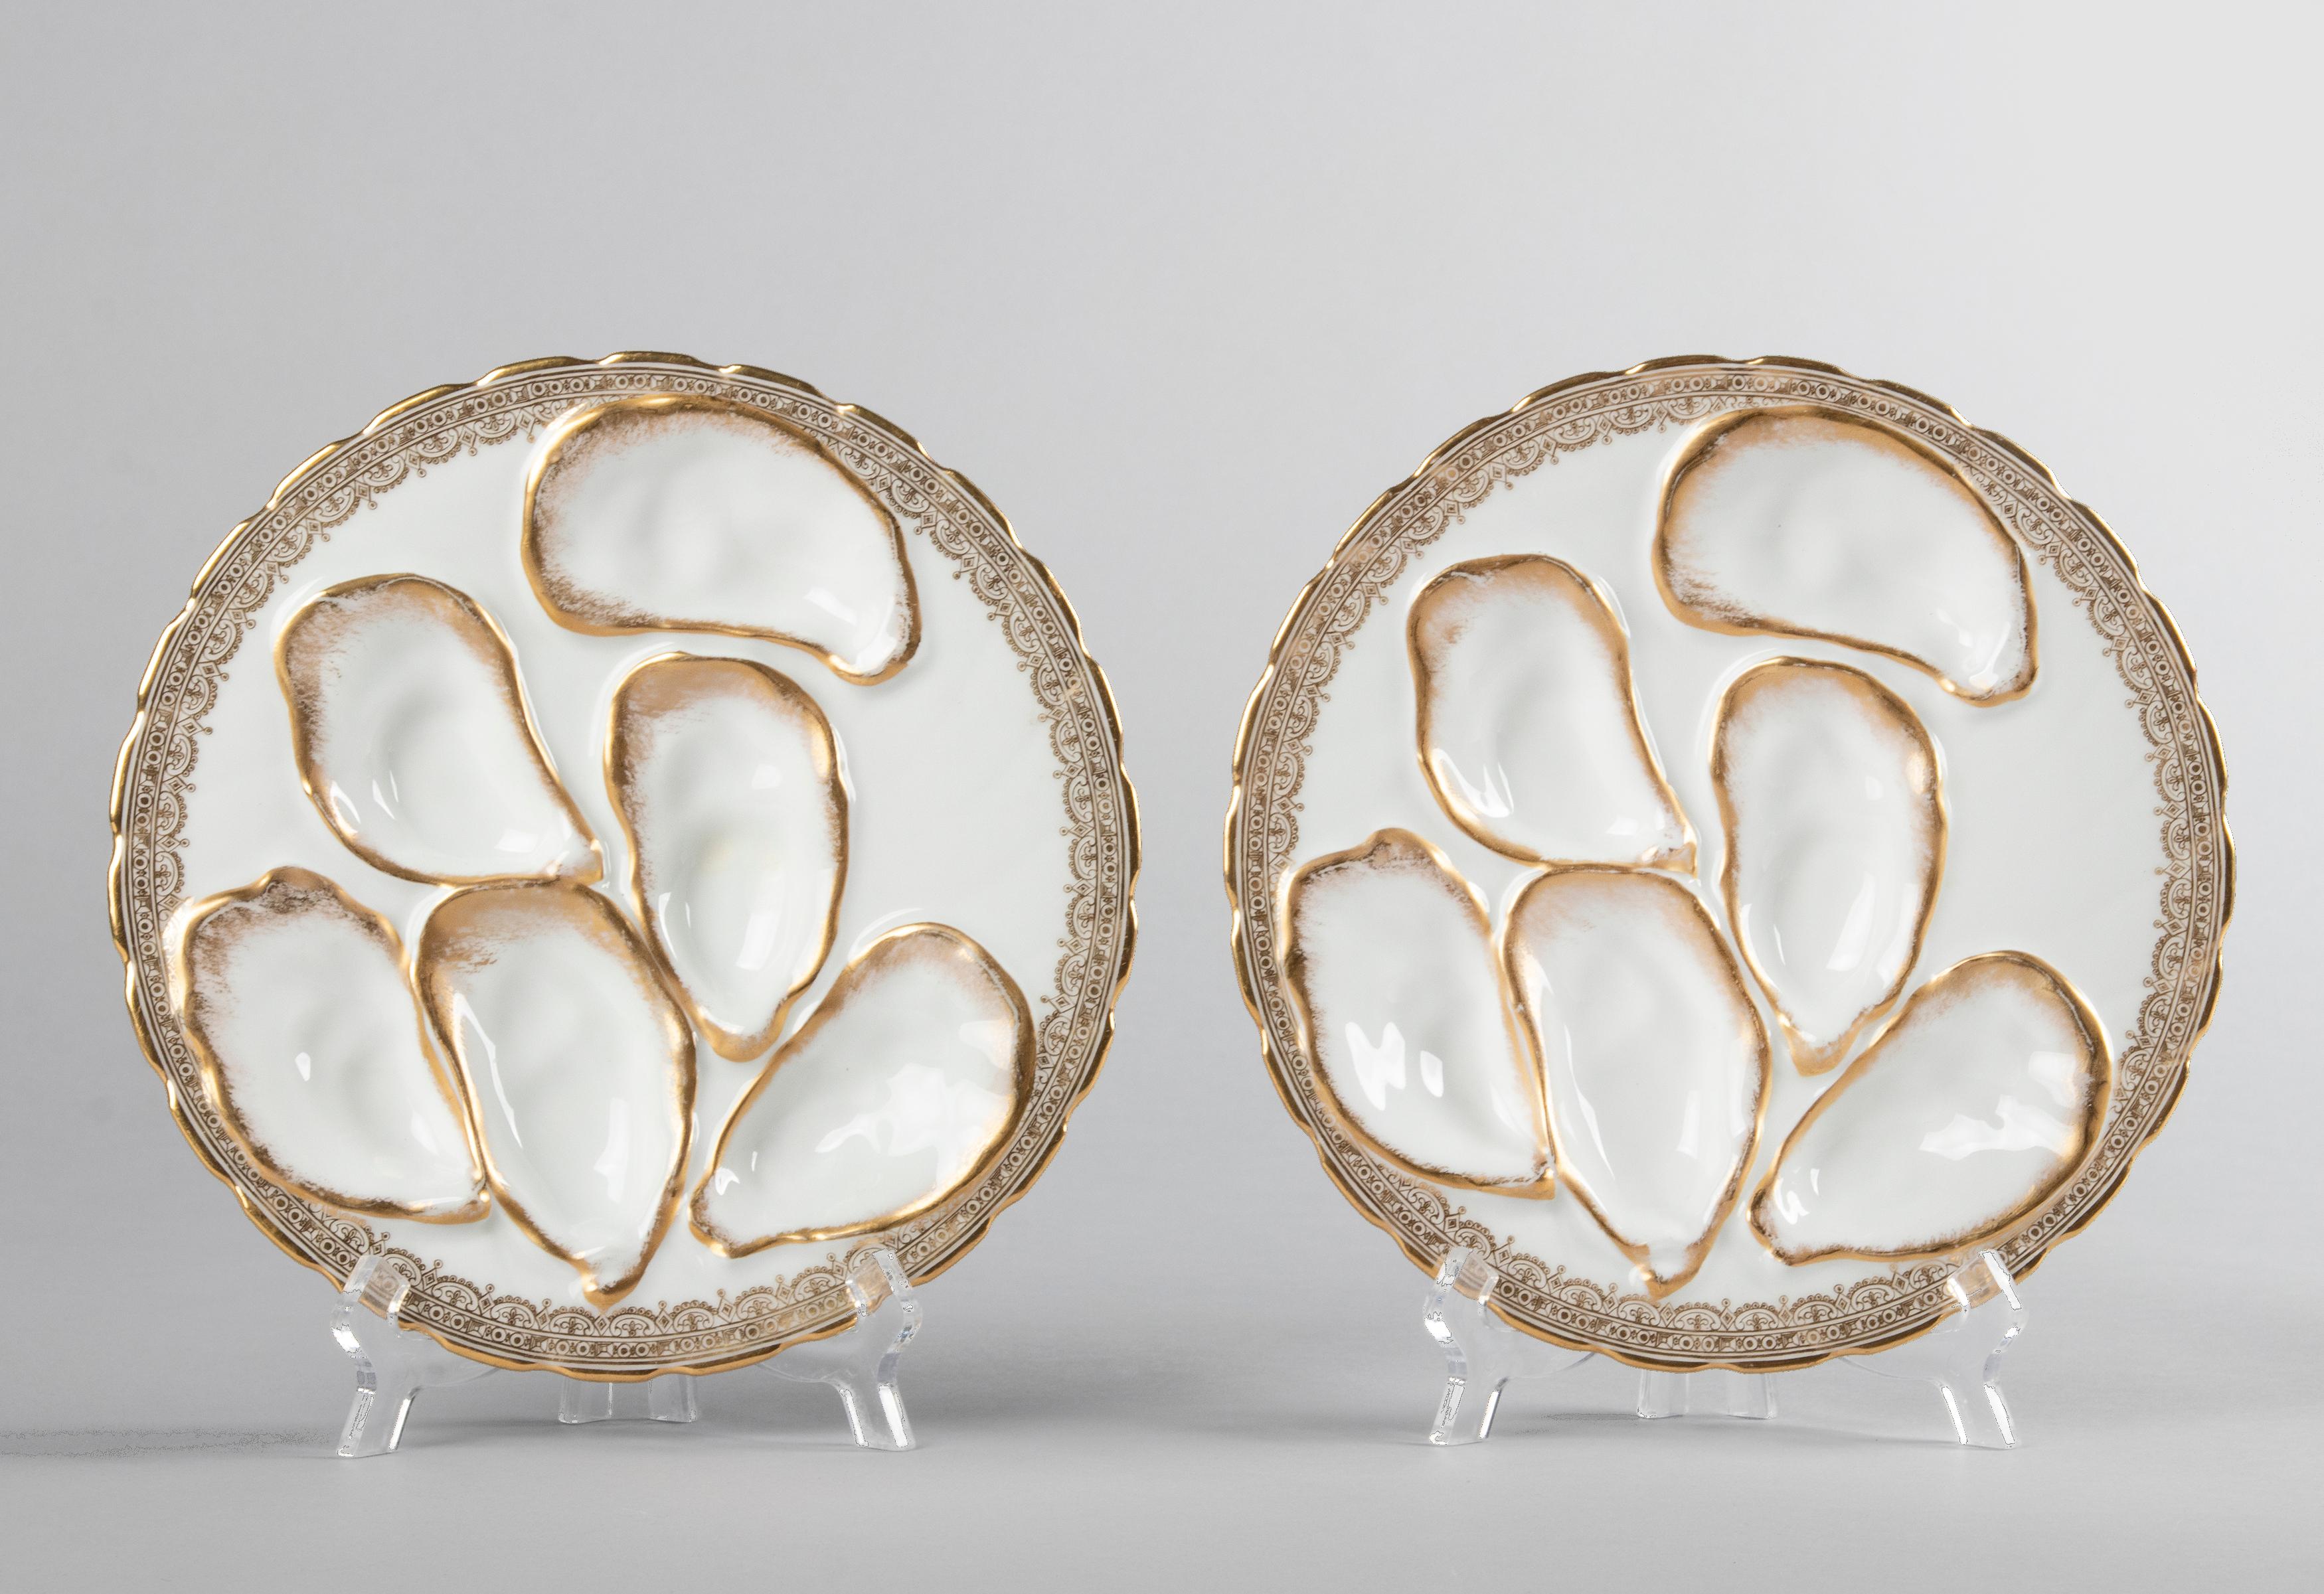 Two beautiful antique oyster plates by the French maker Haviland Limoges. The plates are snow white in color with hand-painted gold accents. The plates have a beautiful relief work with space for 6 oysters per plate. What is special about these